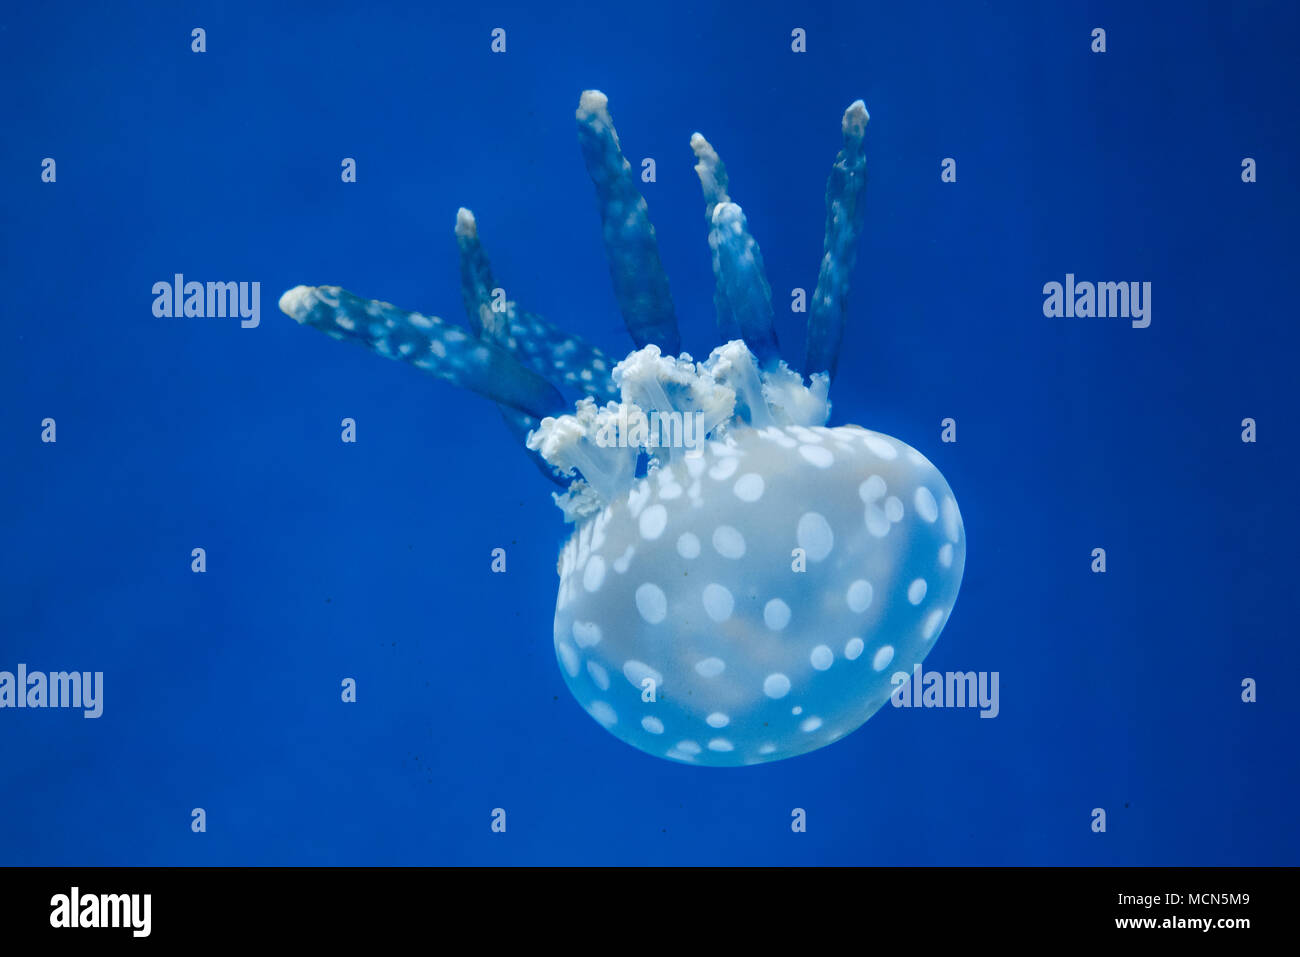 australian spotted jelly fish also known as floating bell Stock Photo